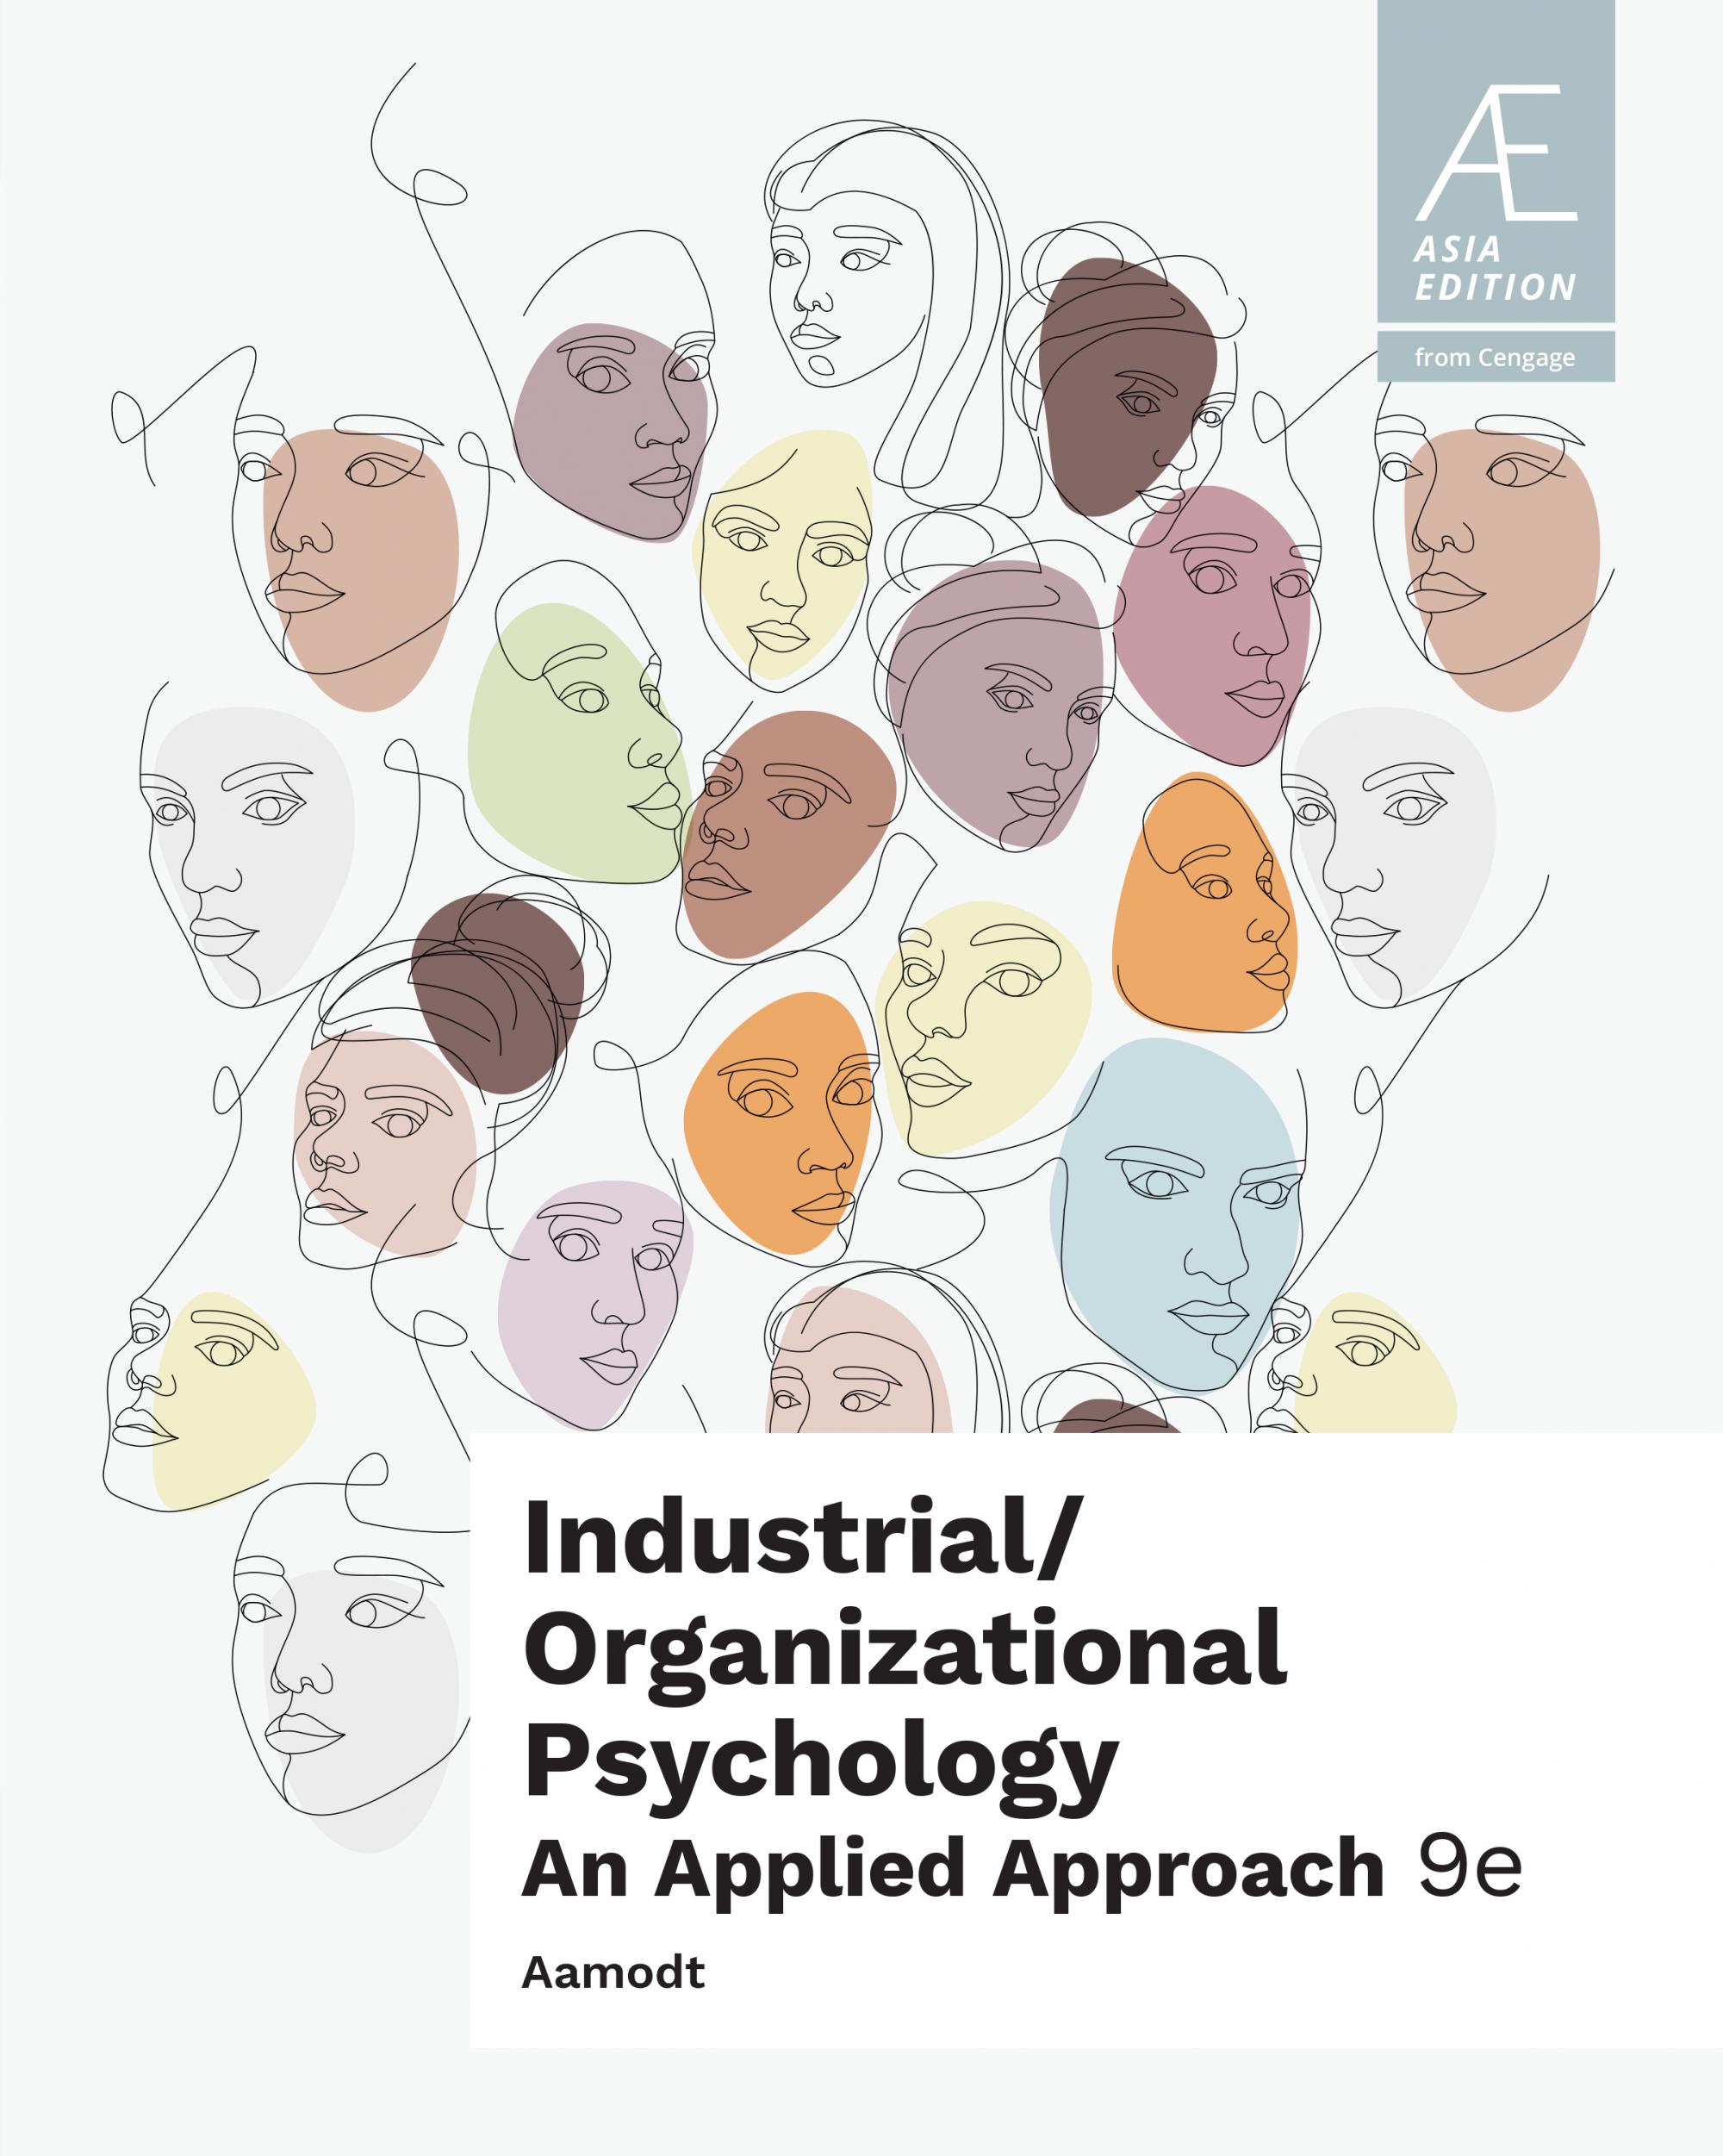 INDUSTRIAL/ORGANIZATIONAL PSYCHOLOGY: AN APPLIED APPROACH (ASIA EDITION)